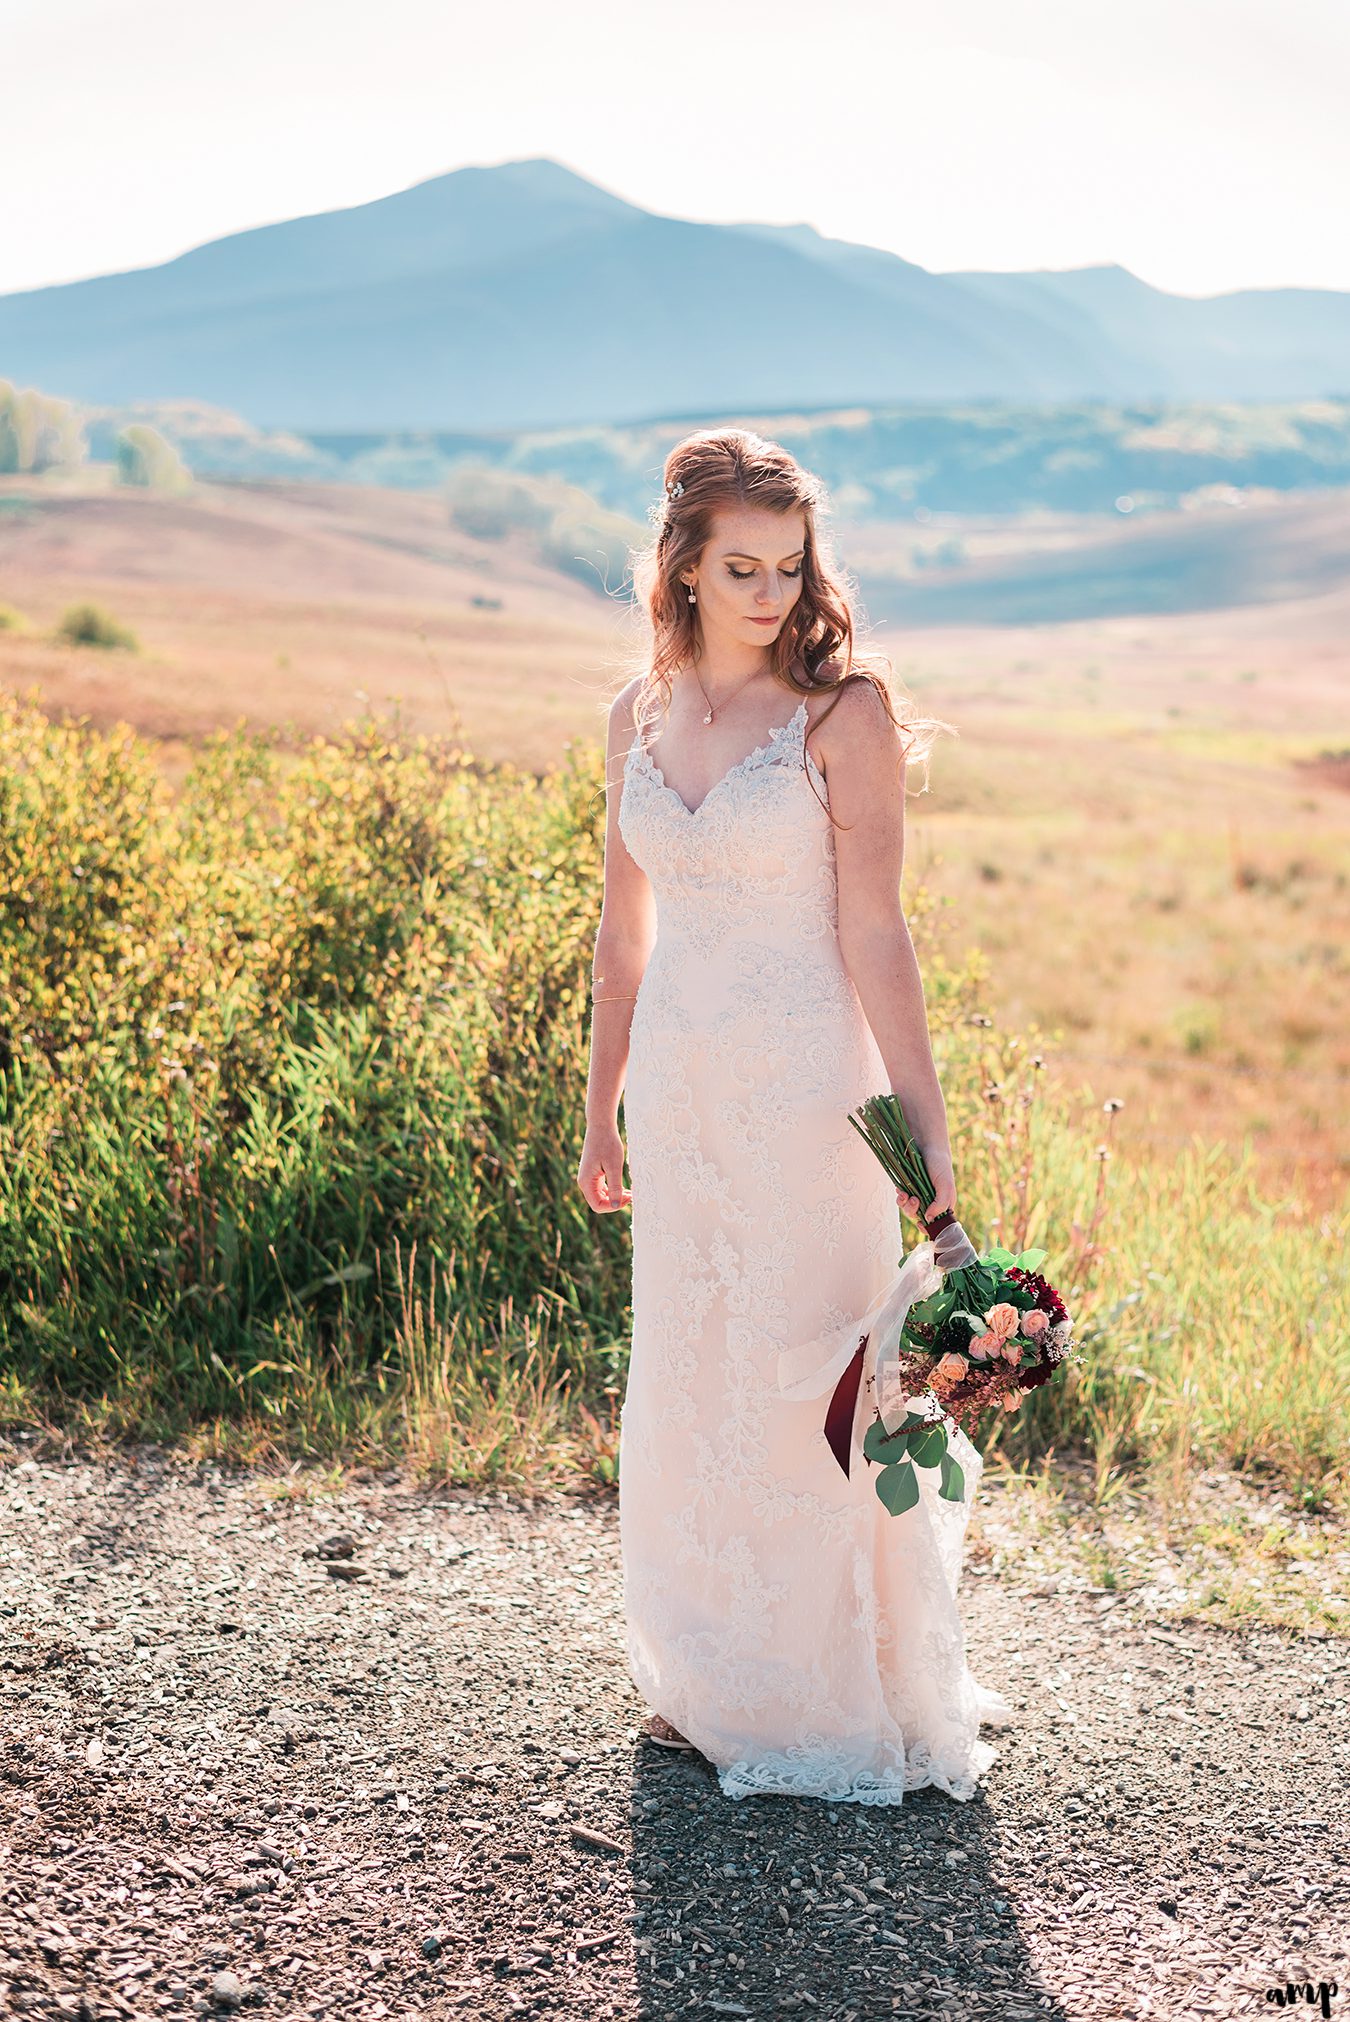 Bride gazing at her bouquet among the fall colors with mountains in the background